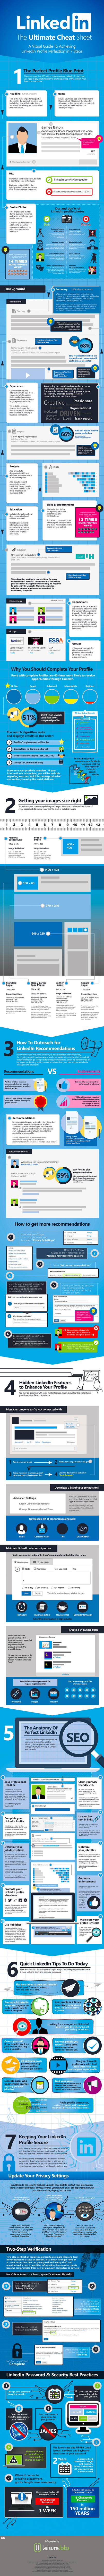 linkedin-cheat-sheet-infographic.png